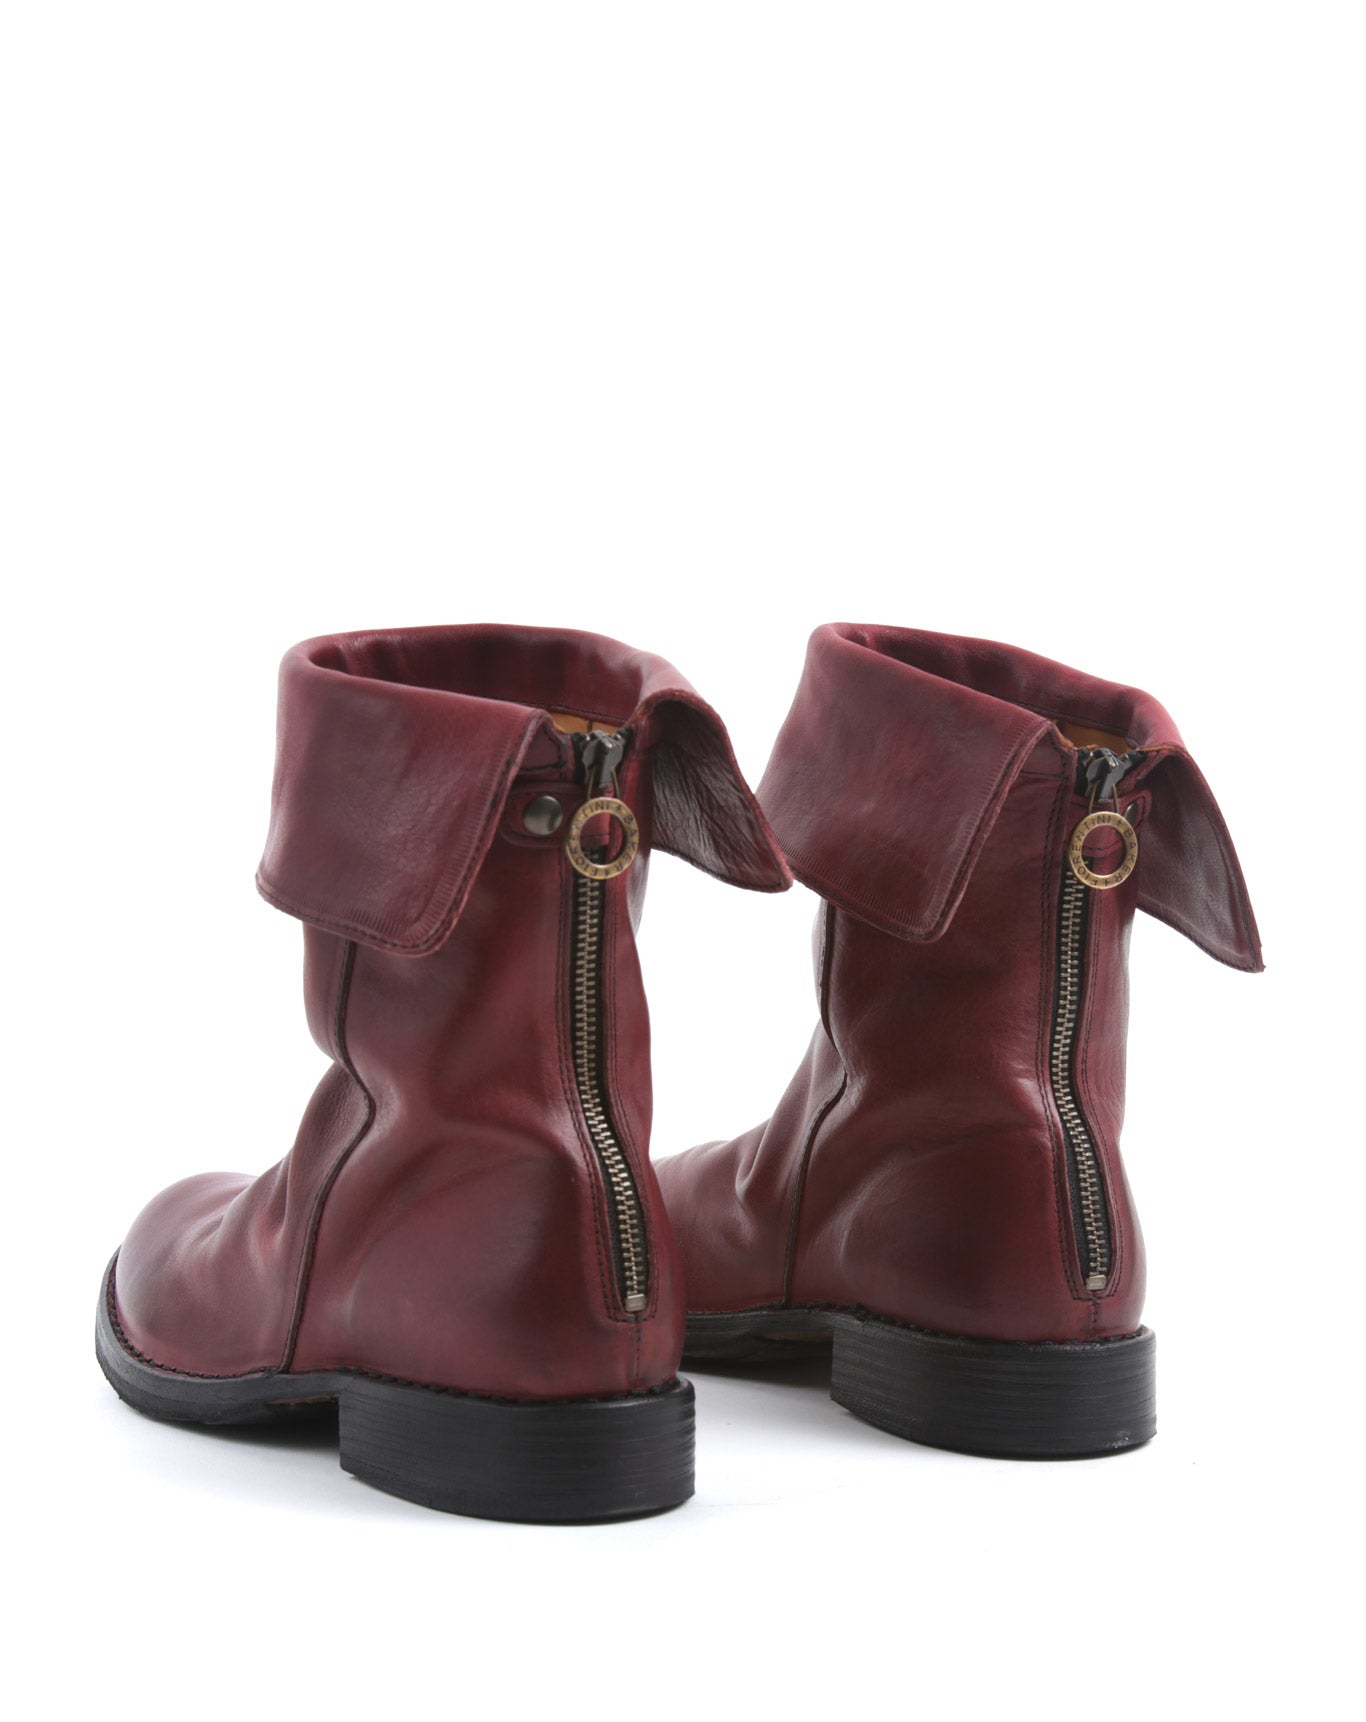 FIORENTINI + BAKER, ETERNITY ELLA, Mid height boot, wear the cuff up or down, they are very flattering either way. Handcrafted by skilled artisans. Made in Italy. Made to last.